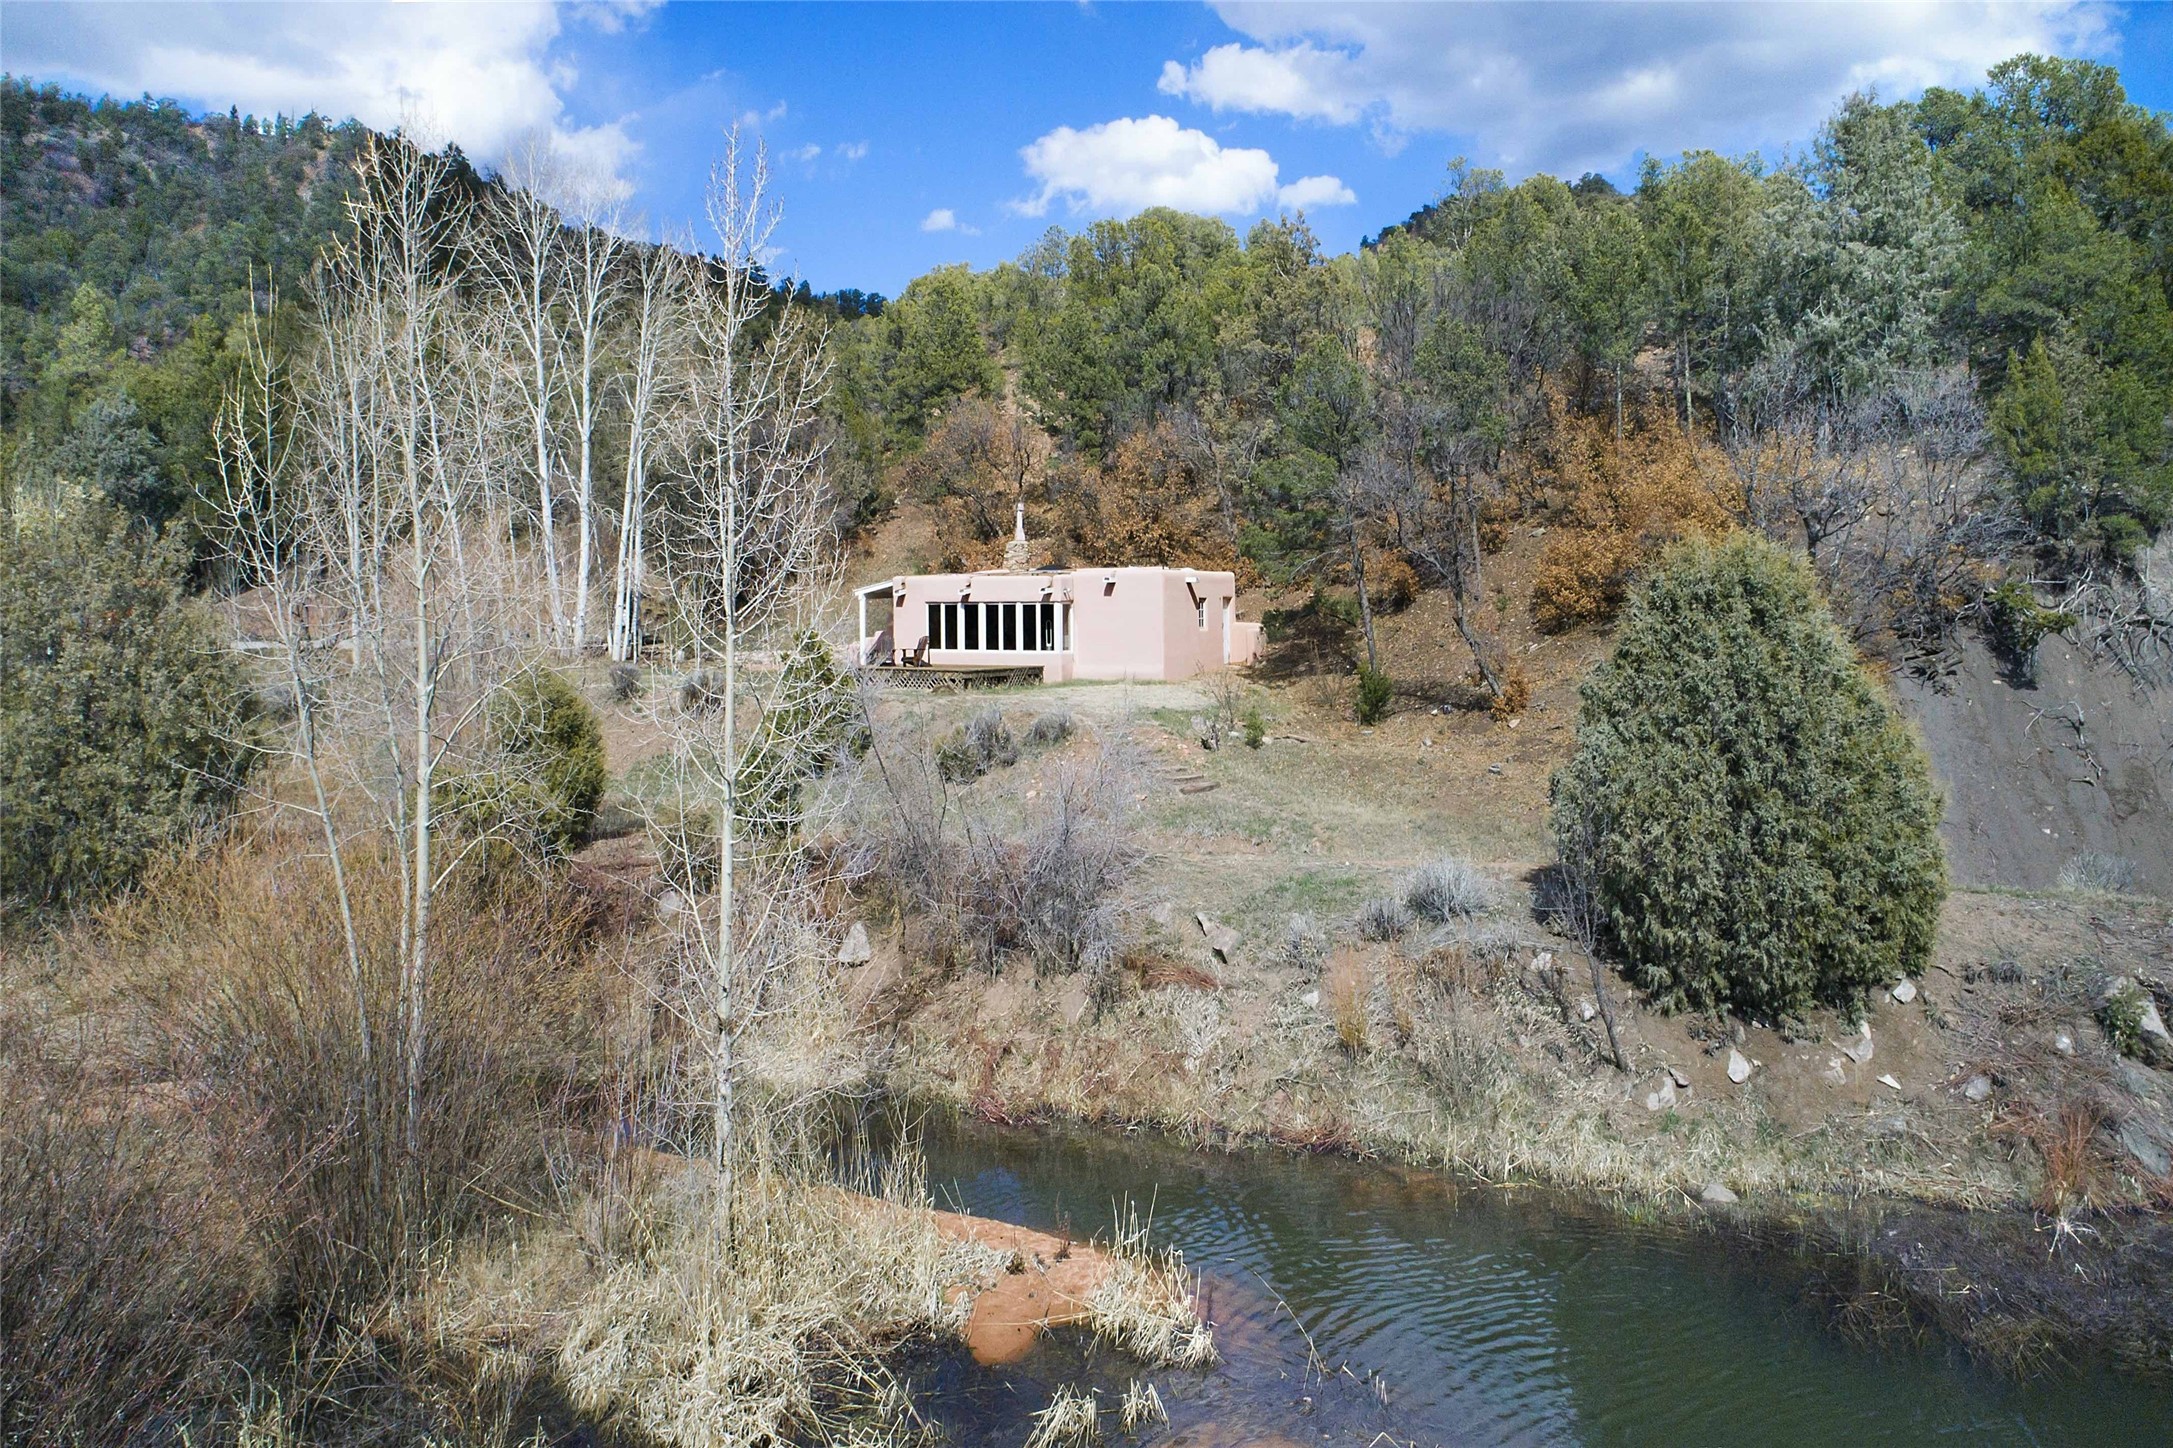 38 Johnsons Ranch, Santa Fe, New Mexico 87505, 3 Bedrooms Bedrooms, ,4 BathroomsBathrooms,Residential,For Sale,38 Johnsons Ranch,202338110